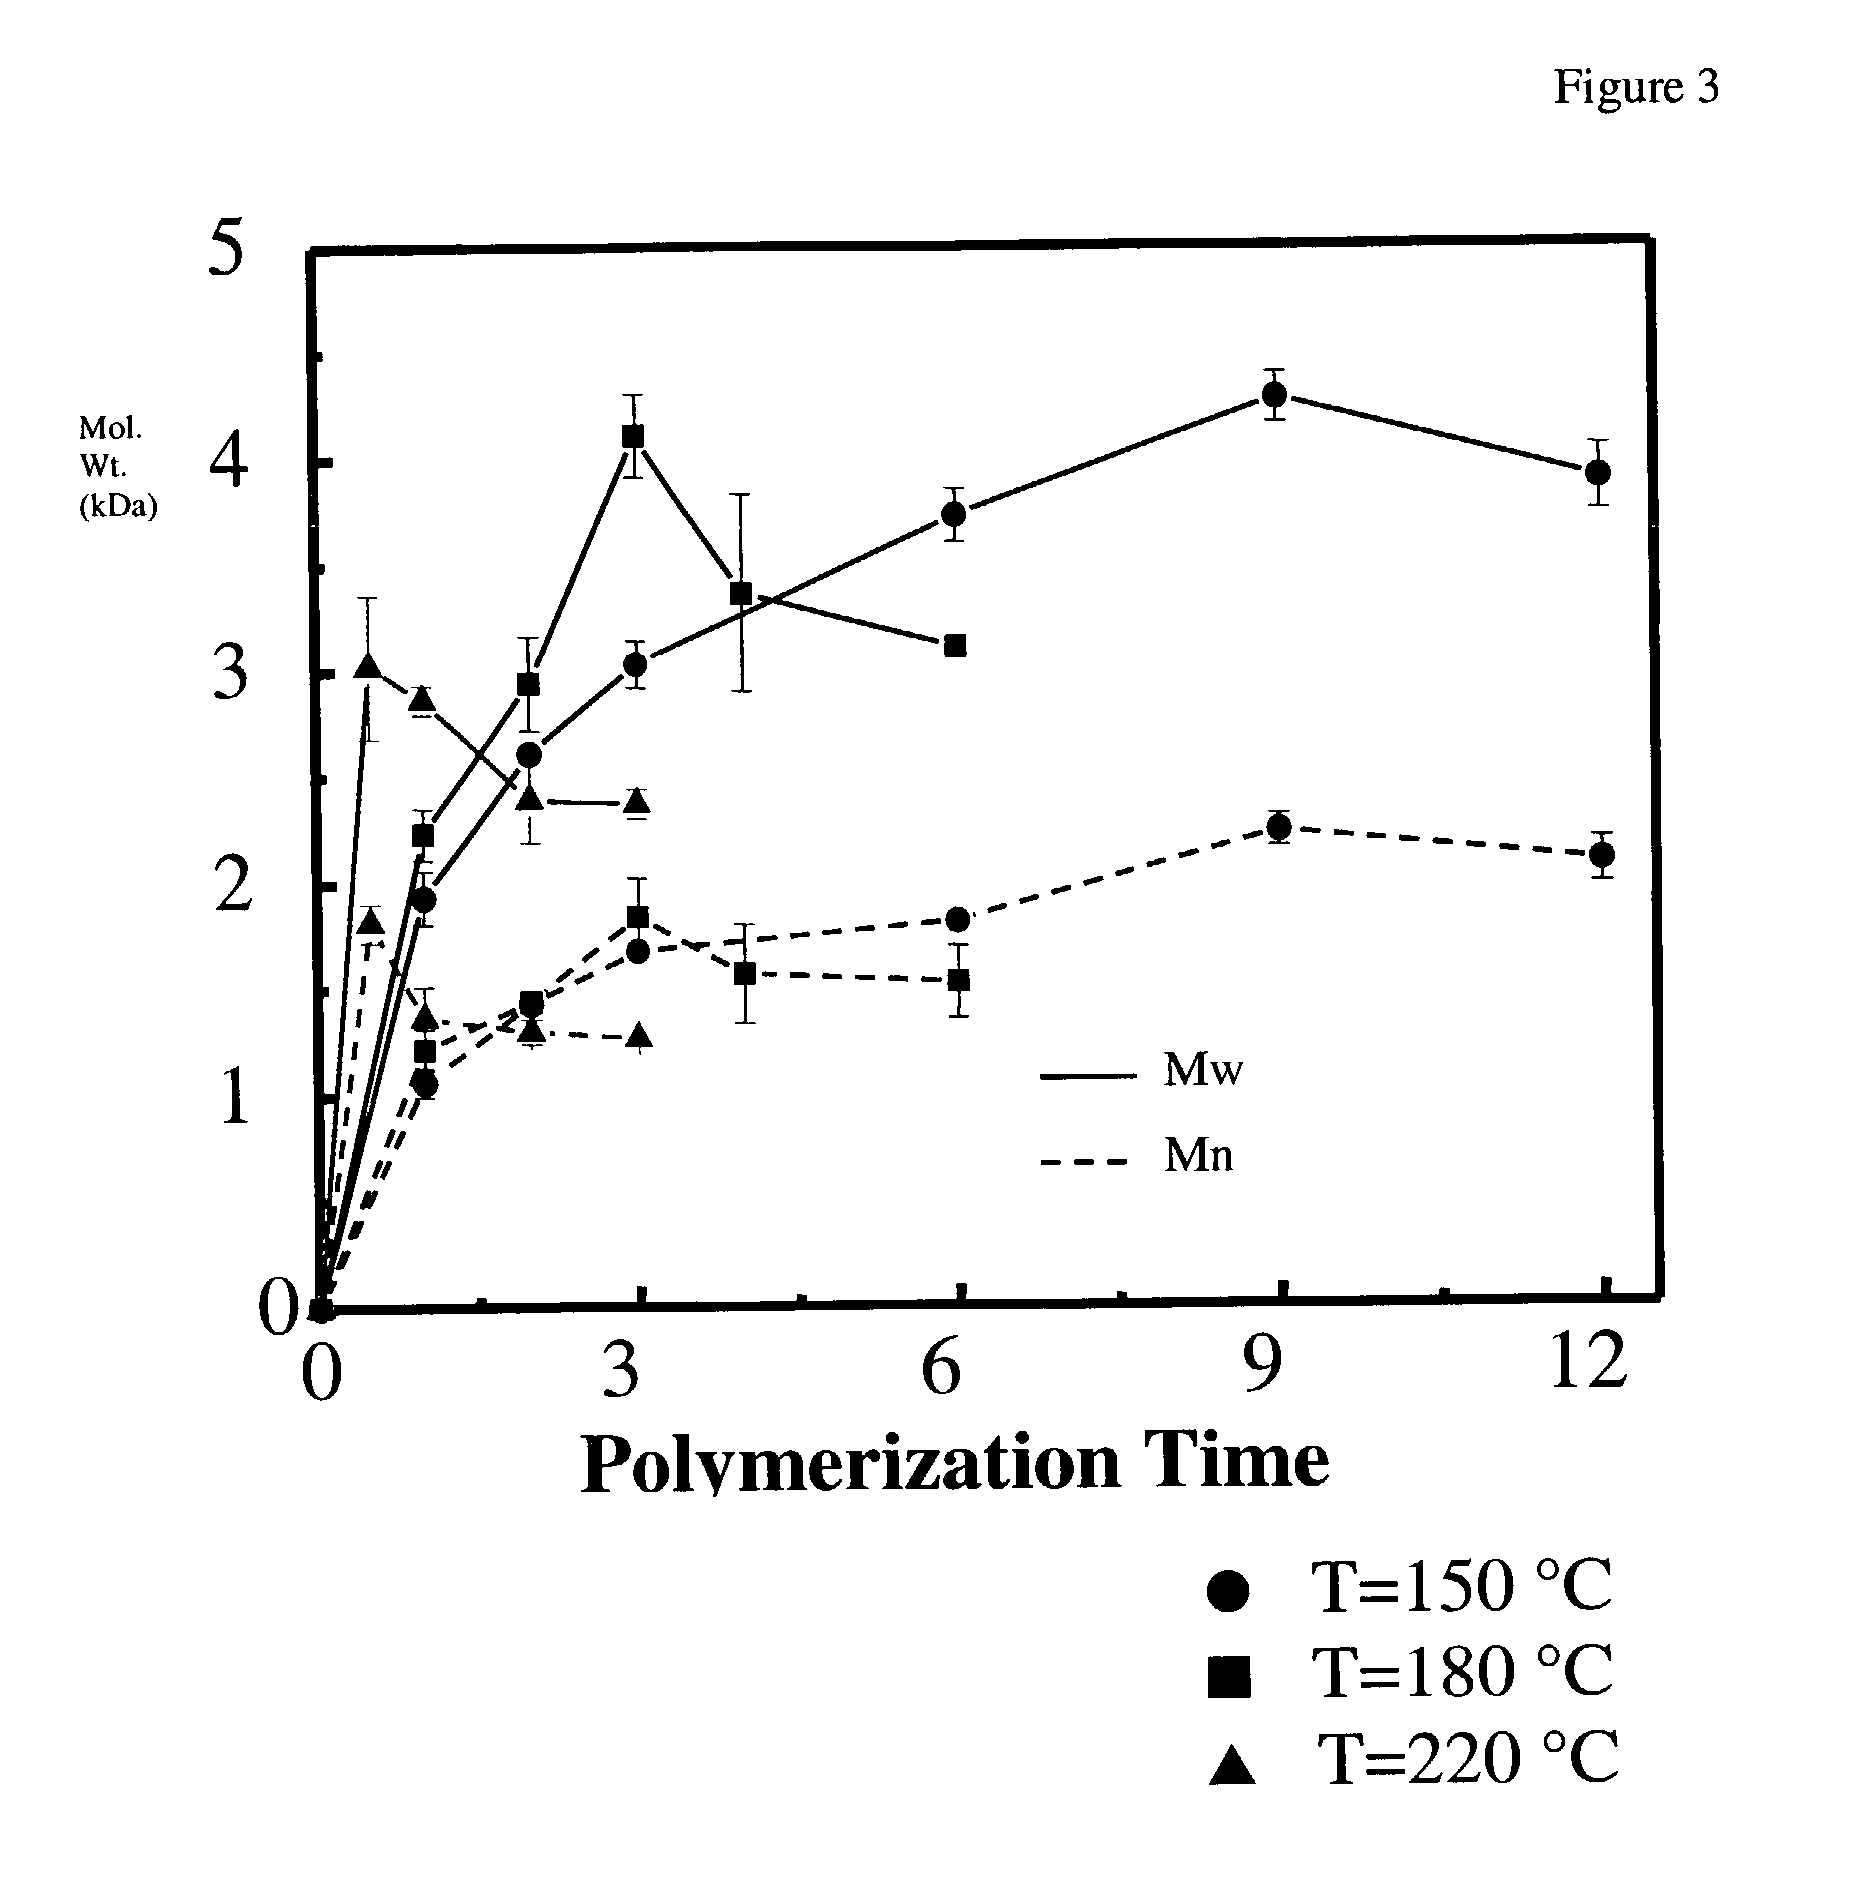 Biodegradable polymer compositions, compositions and uses related thereto